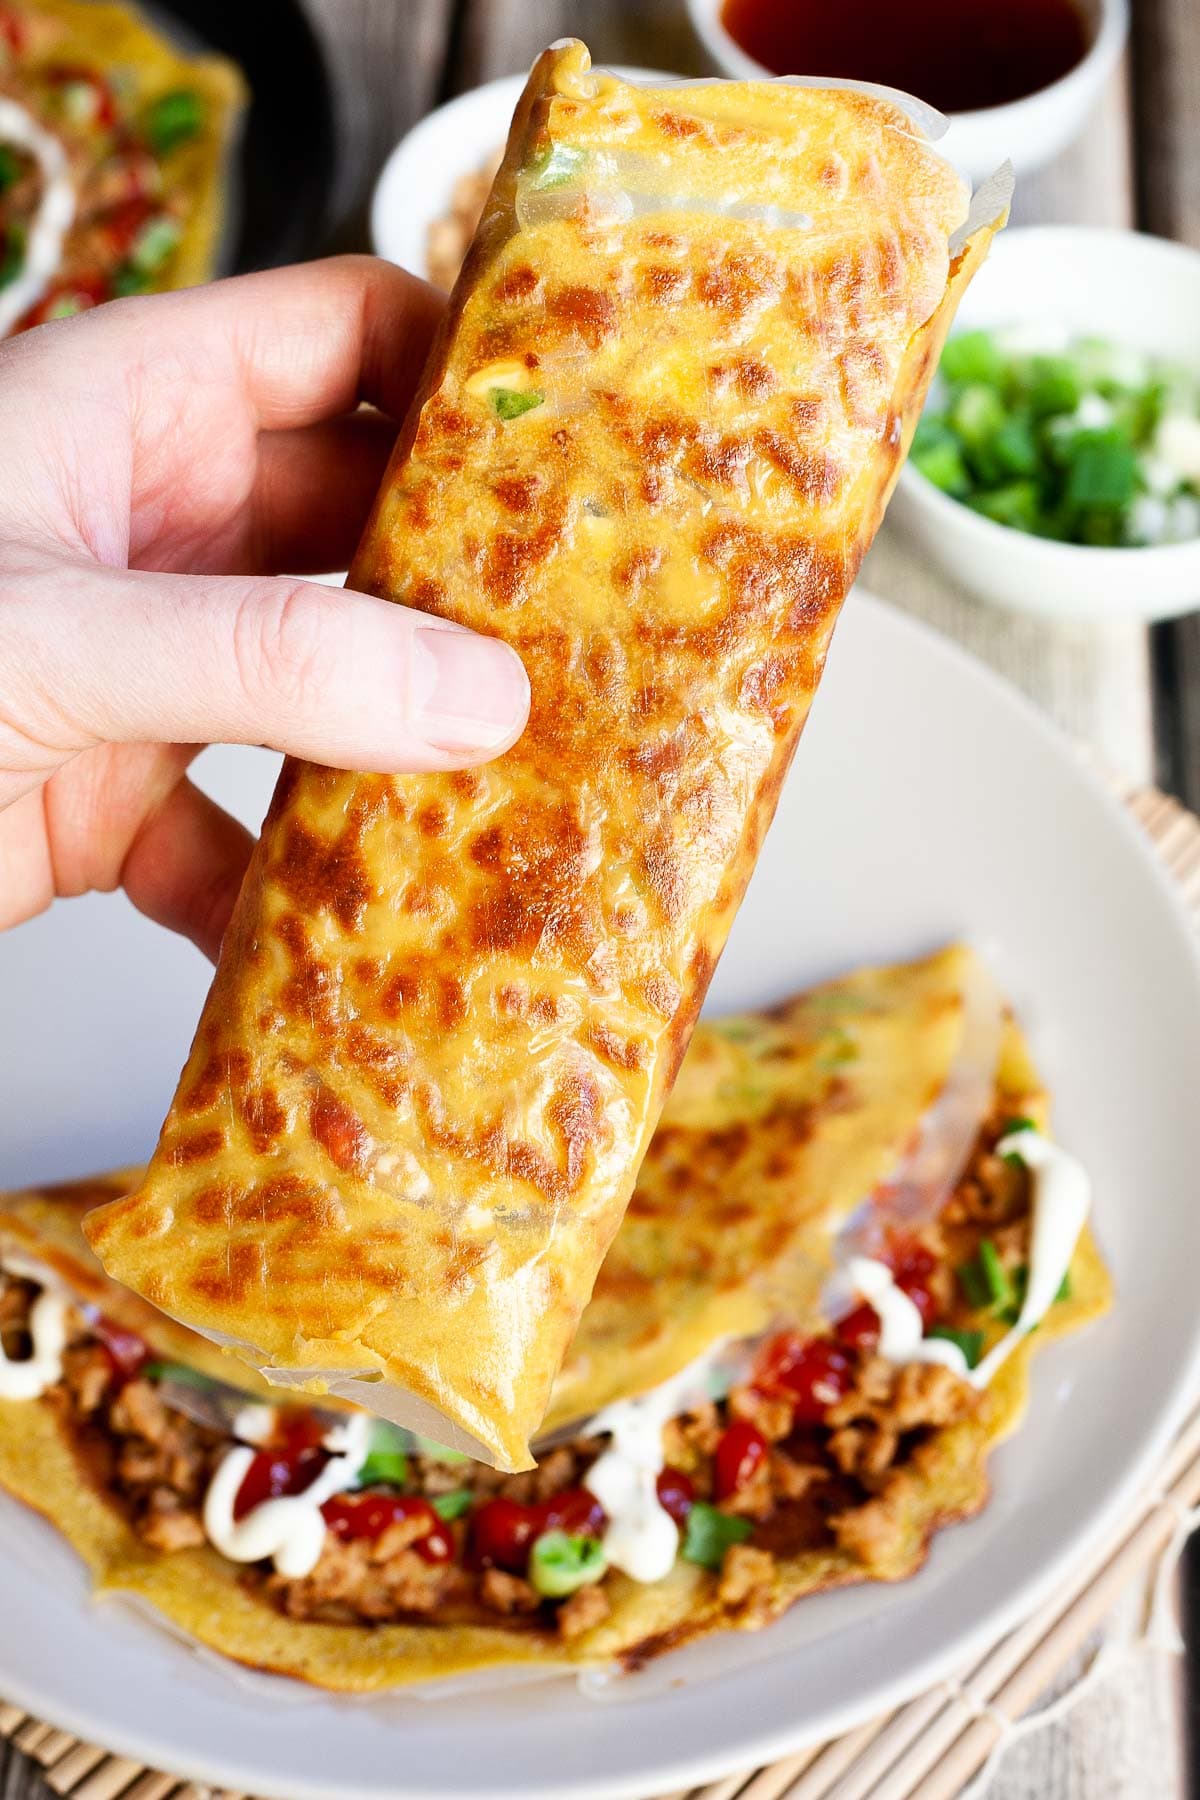 A hand is holding a folded rice paper pizza with yellow and brown spots